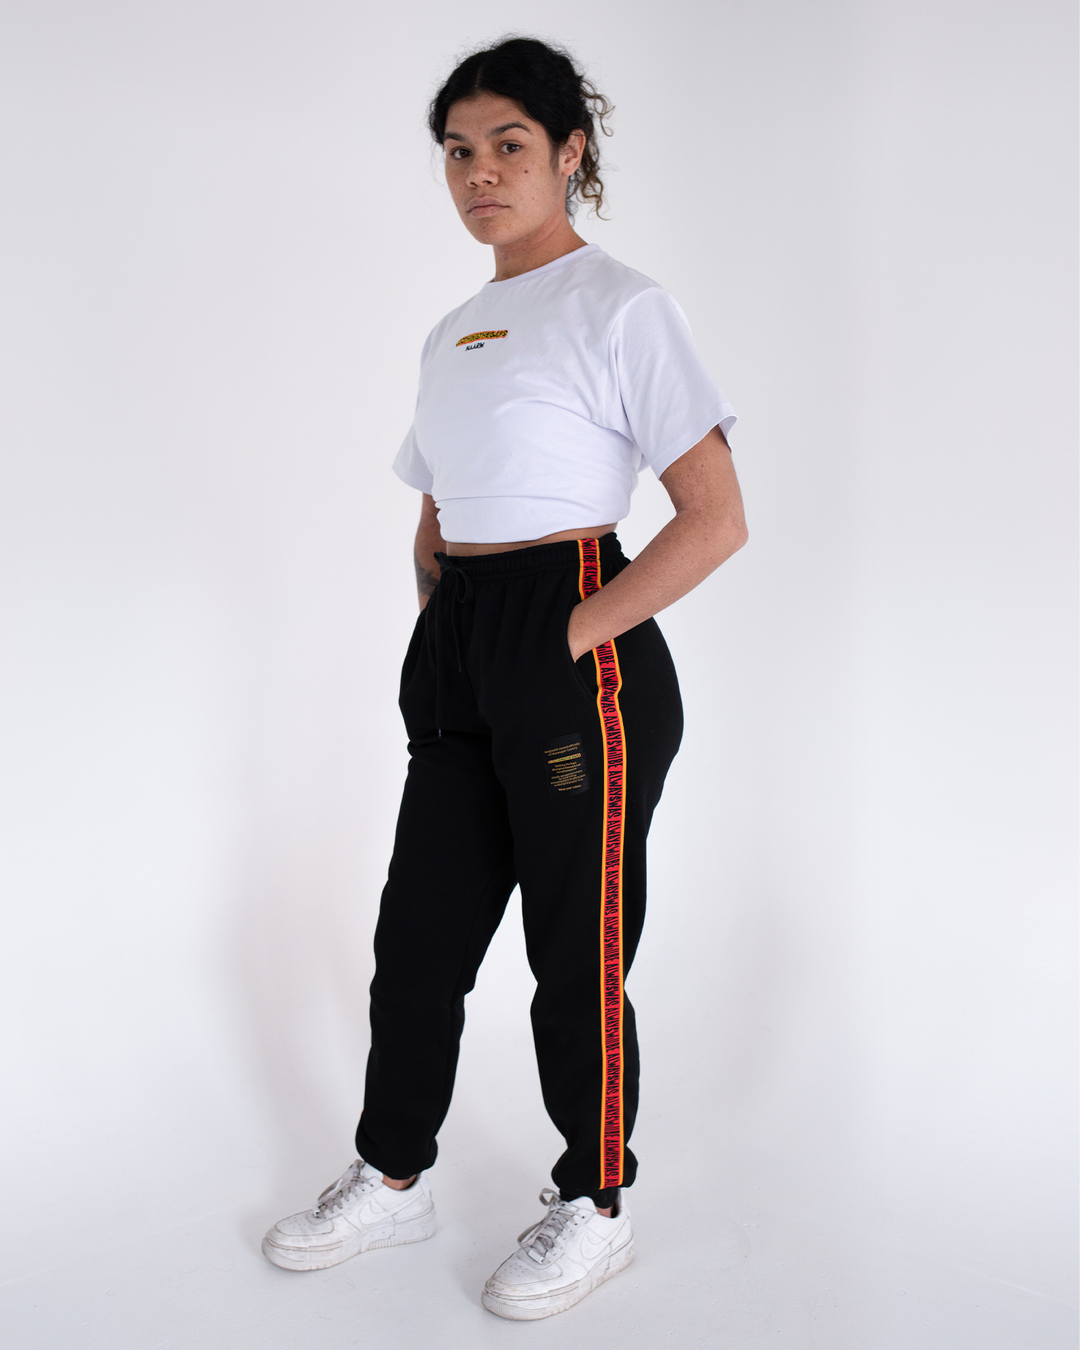 Clothing the Gaps. Black cotton Pants. With black drawstrings. Elastic cuts and waistband. Embroiled Clothing The Gaps logo. Black 'always was always will be' text on a red background with a yellow trim. In a cotton tape strip going down both sides of pants.